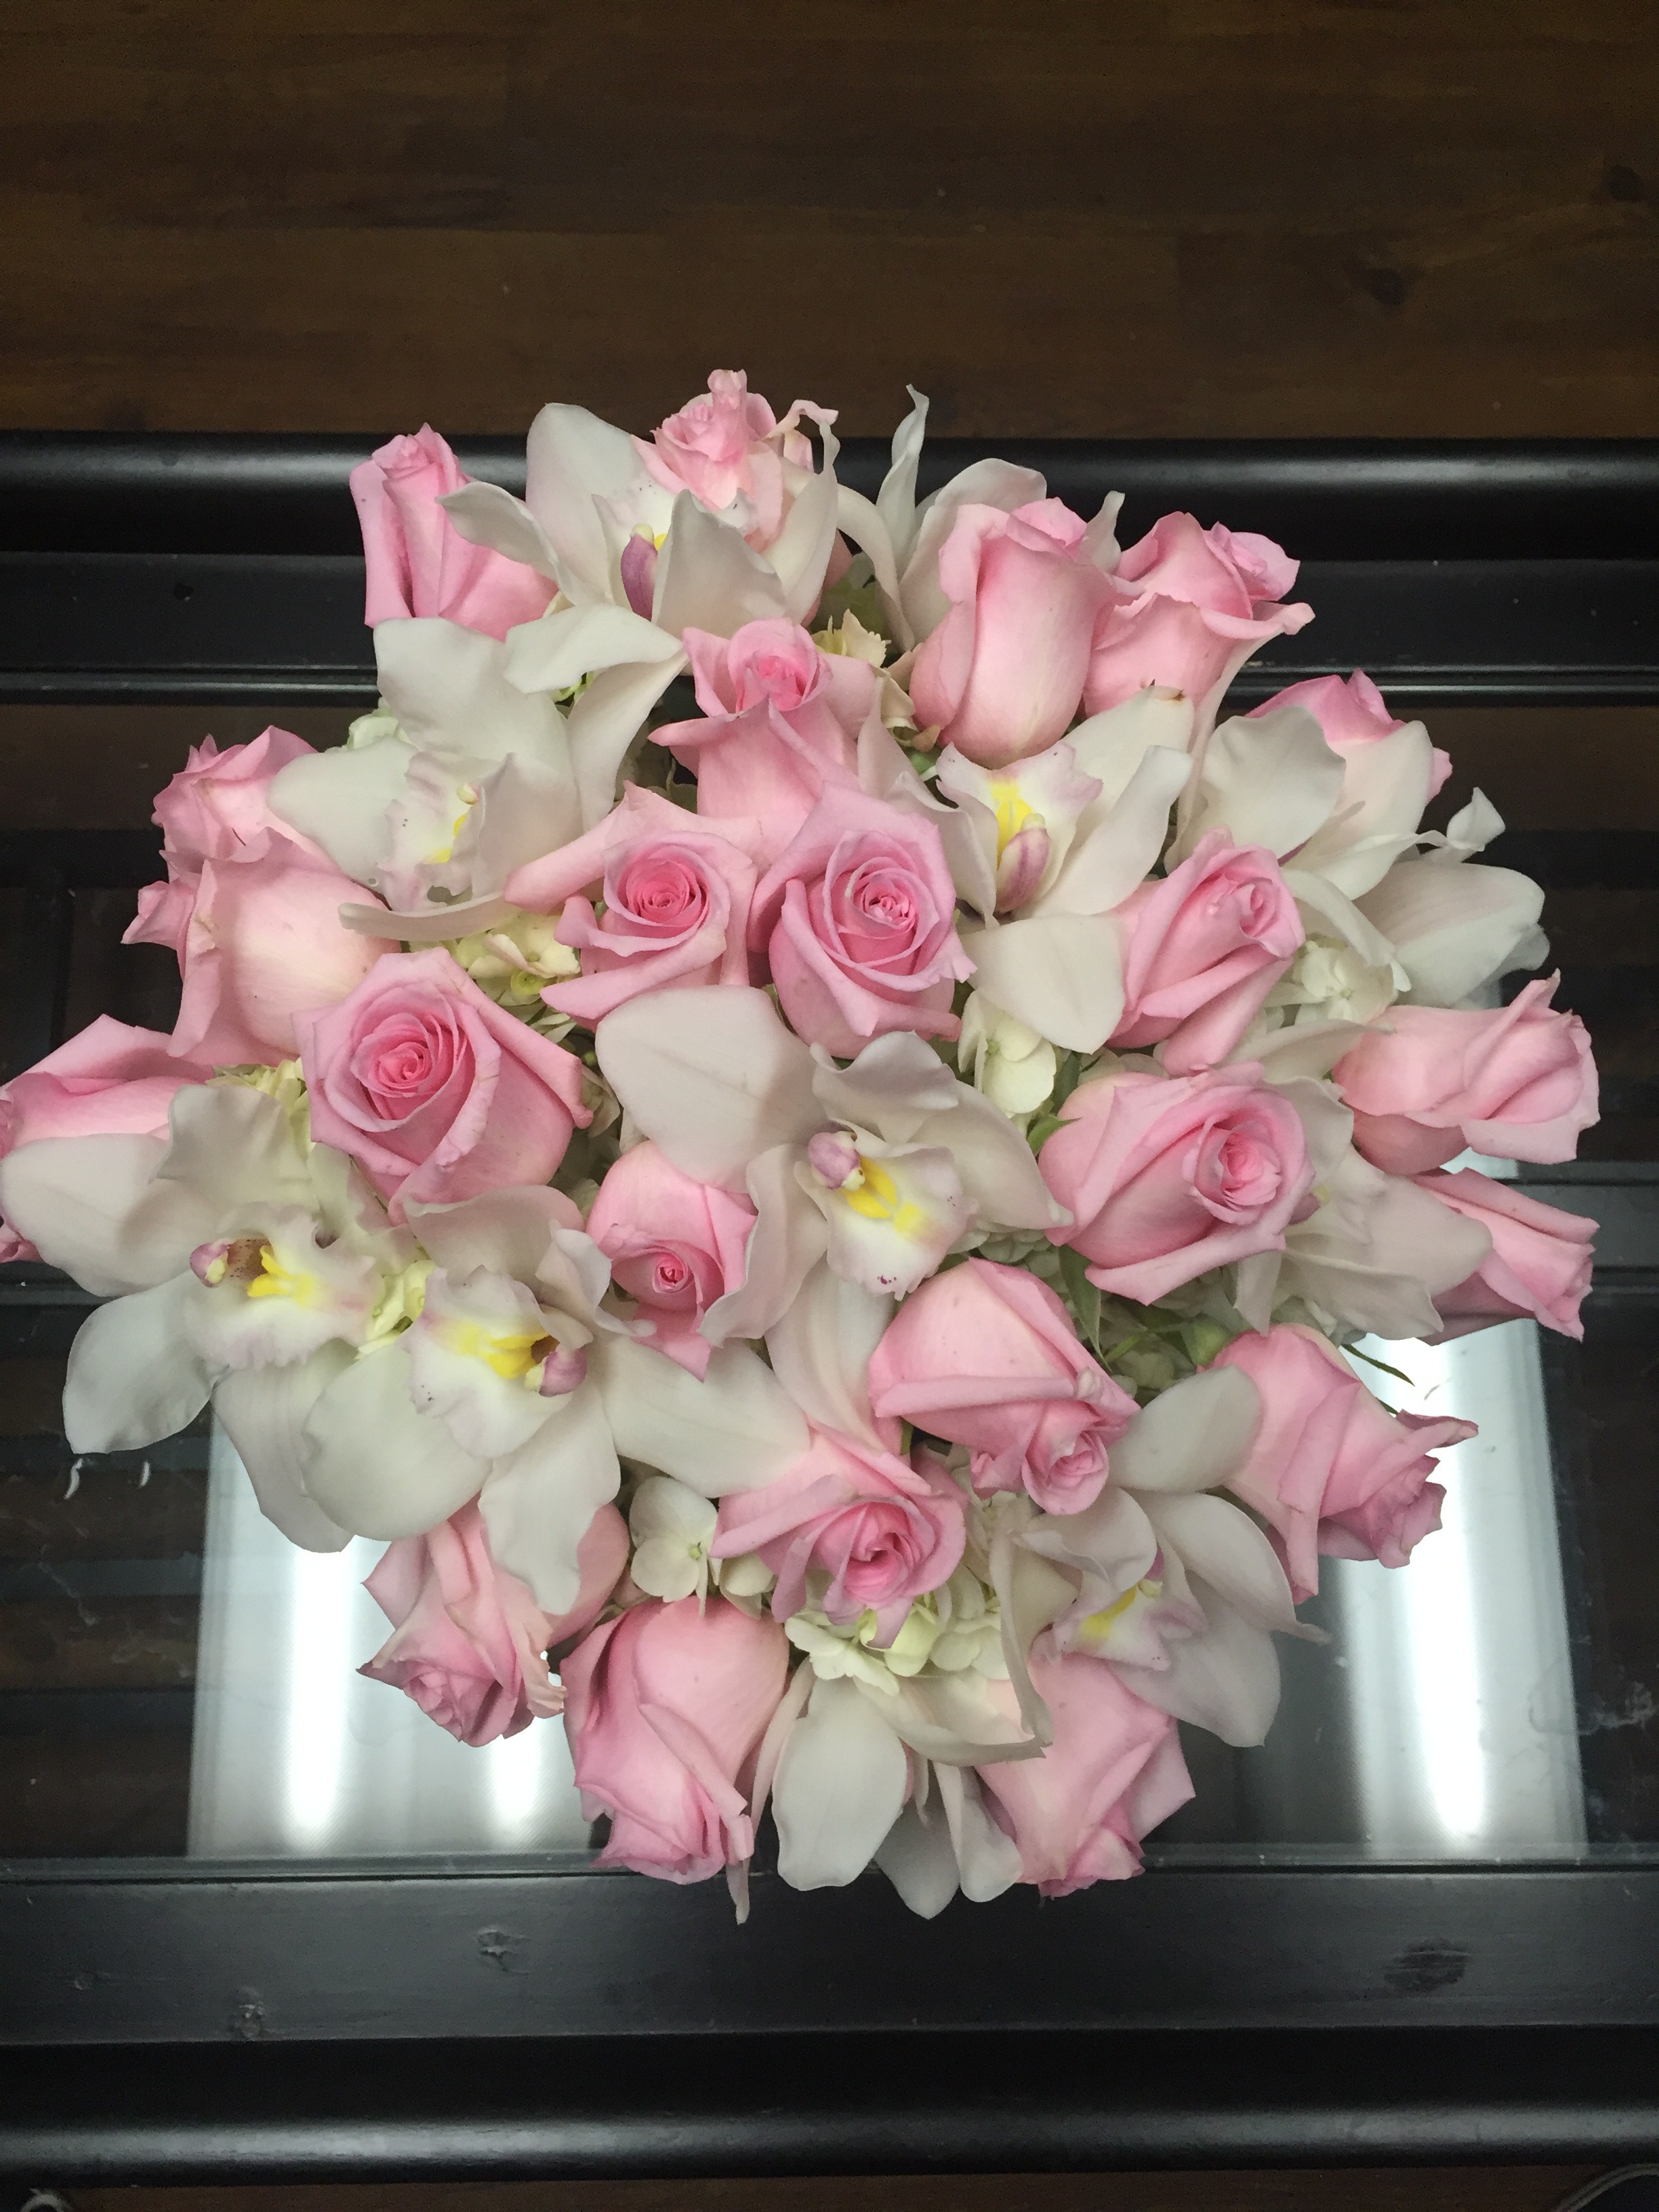 2 doz soft pink roses and white orchids in Westlake Village, CA ...